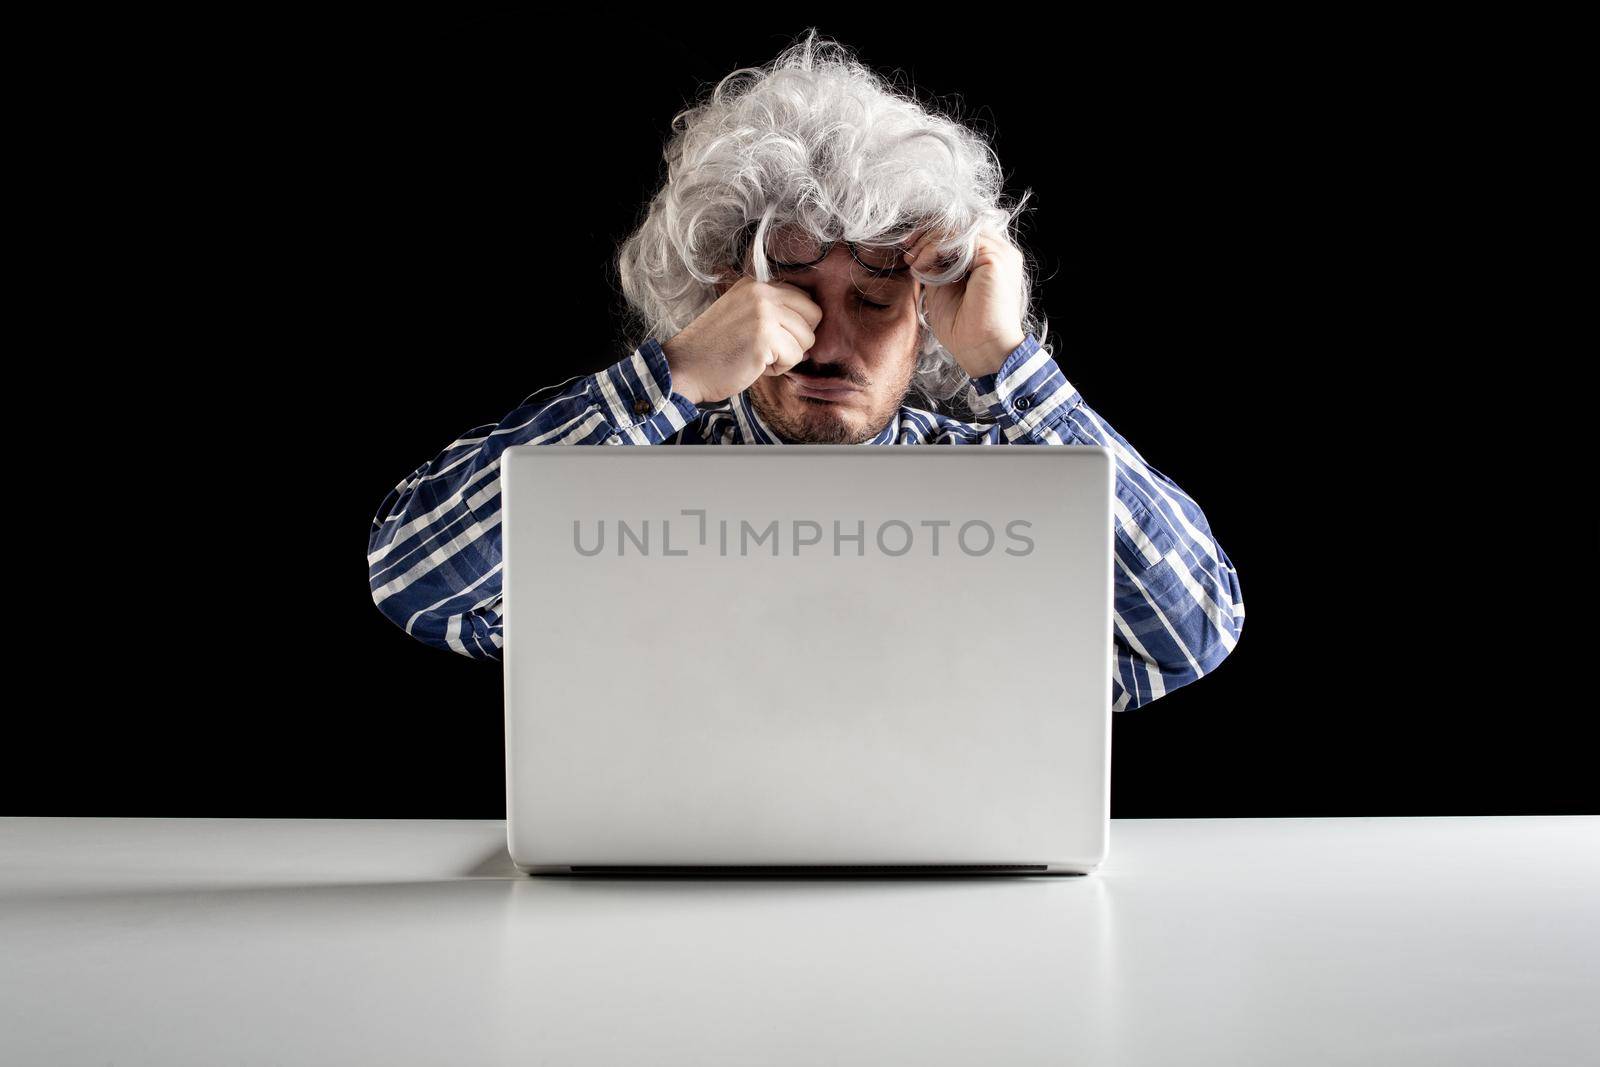 Portrait of a senior man rubbing his tired eyes sitting in front of the laptop computer on a white table. Black background